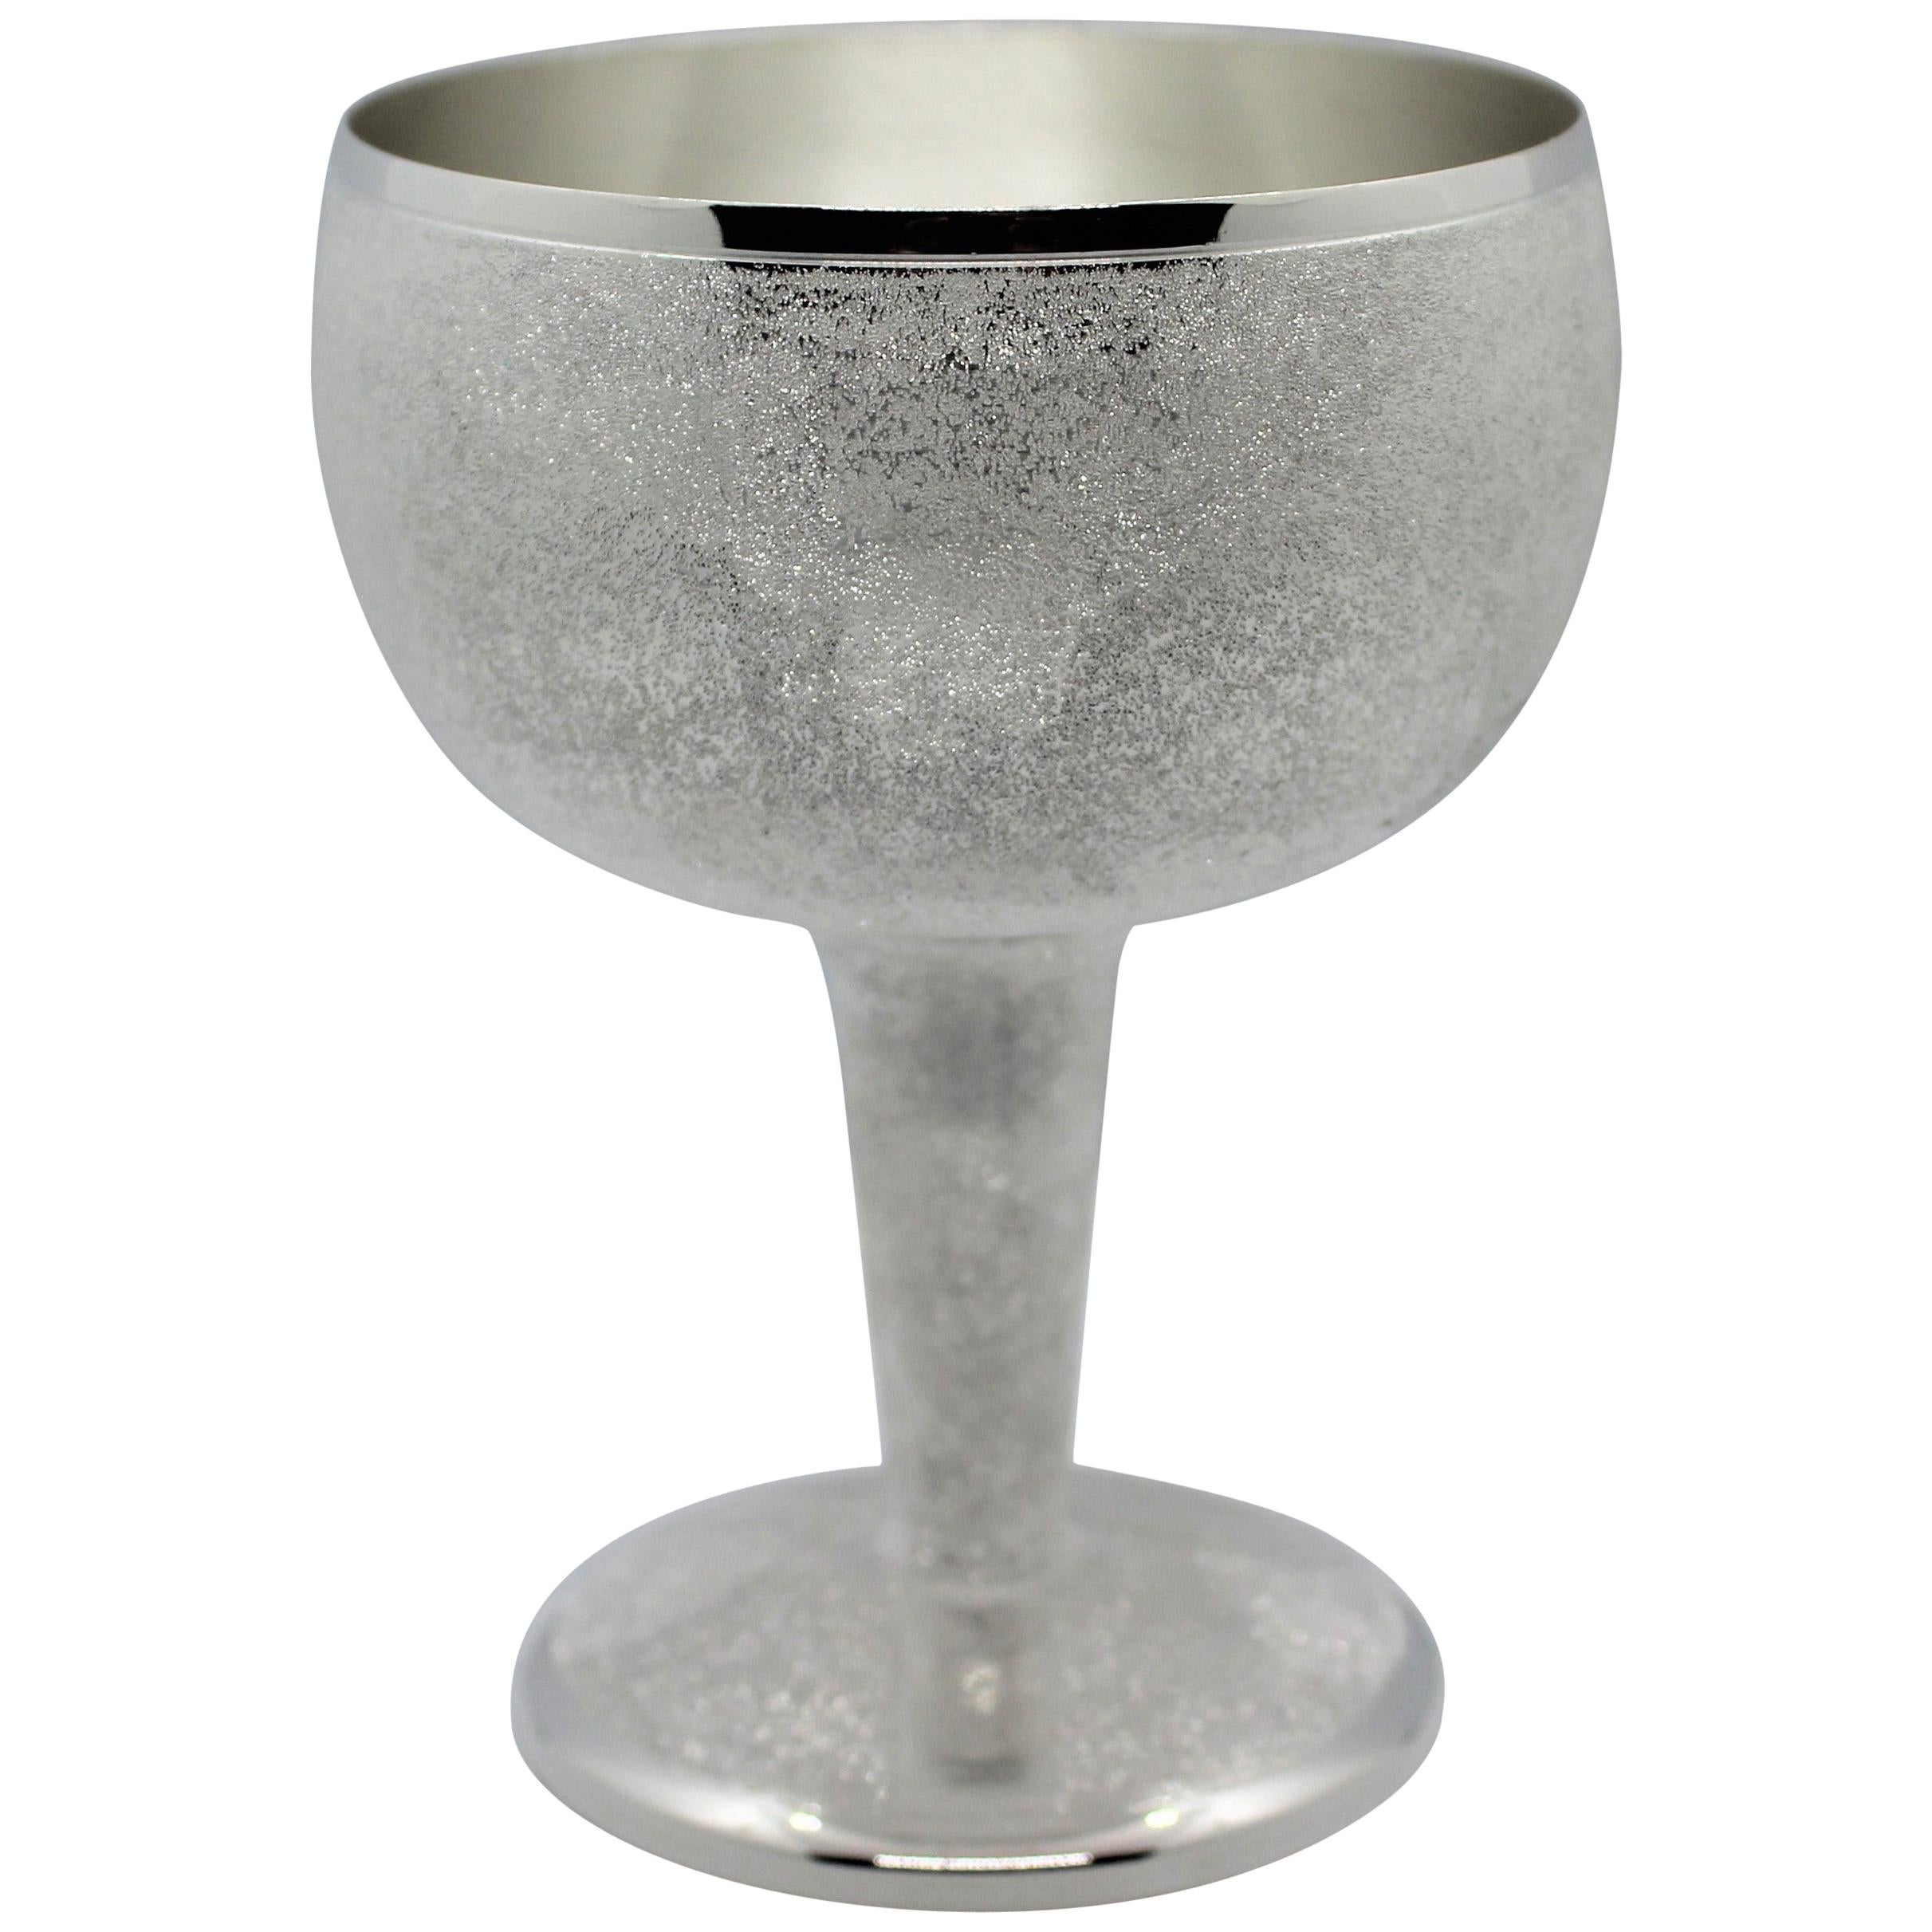 Solid Silver Wine Cup, Moon, Small, 1 Piece, Italy